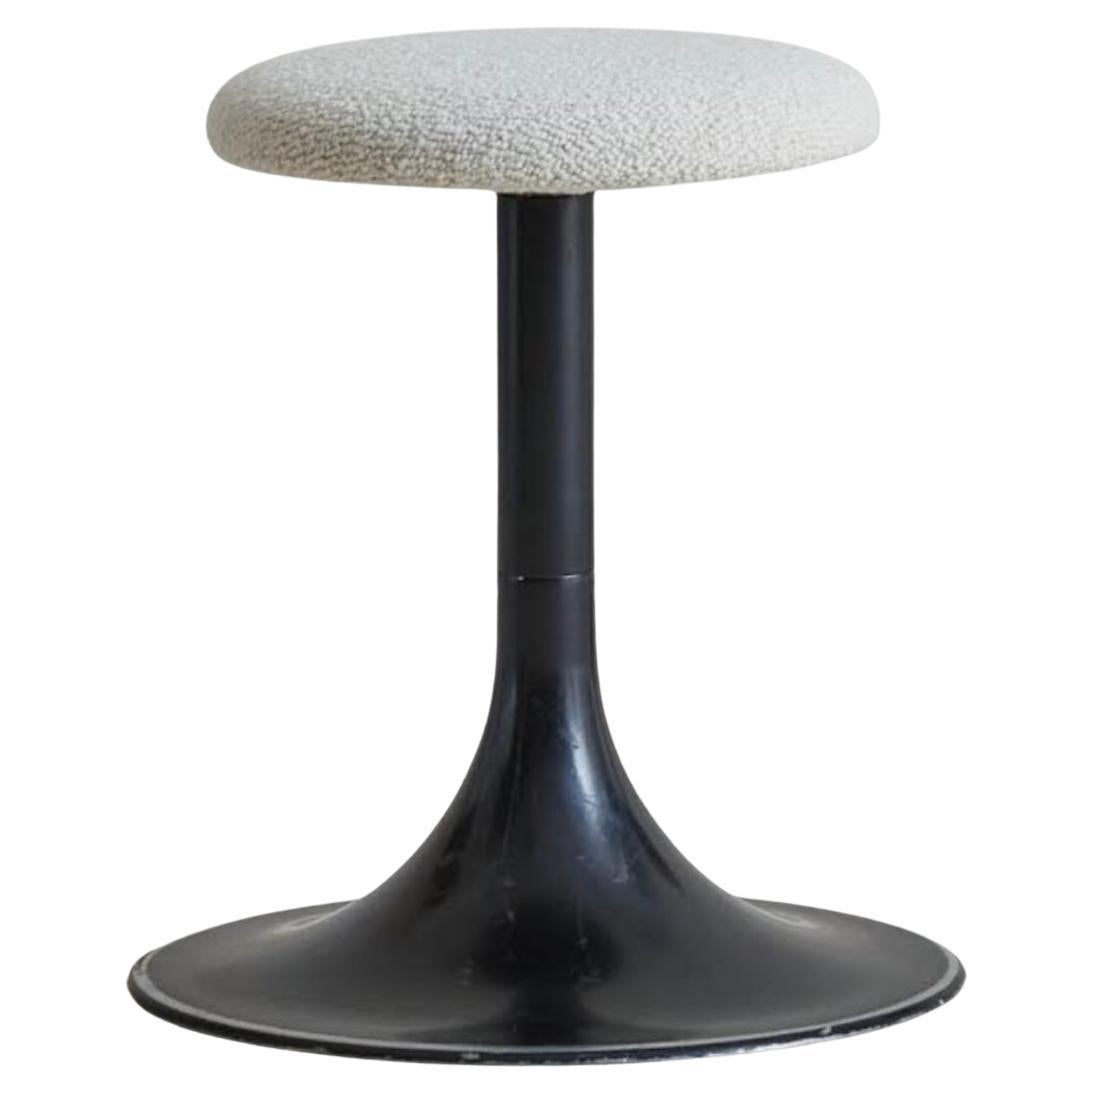 Black Metal Swivel Stool with White Boucle Seat, France 1970s (2 Available)